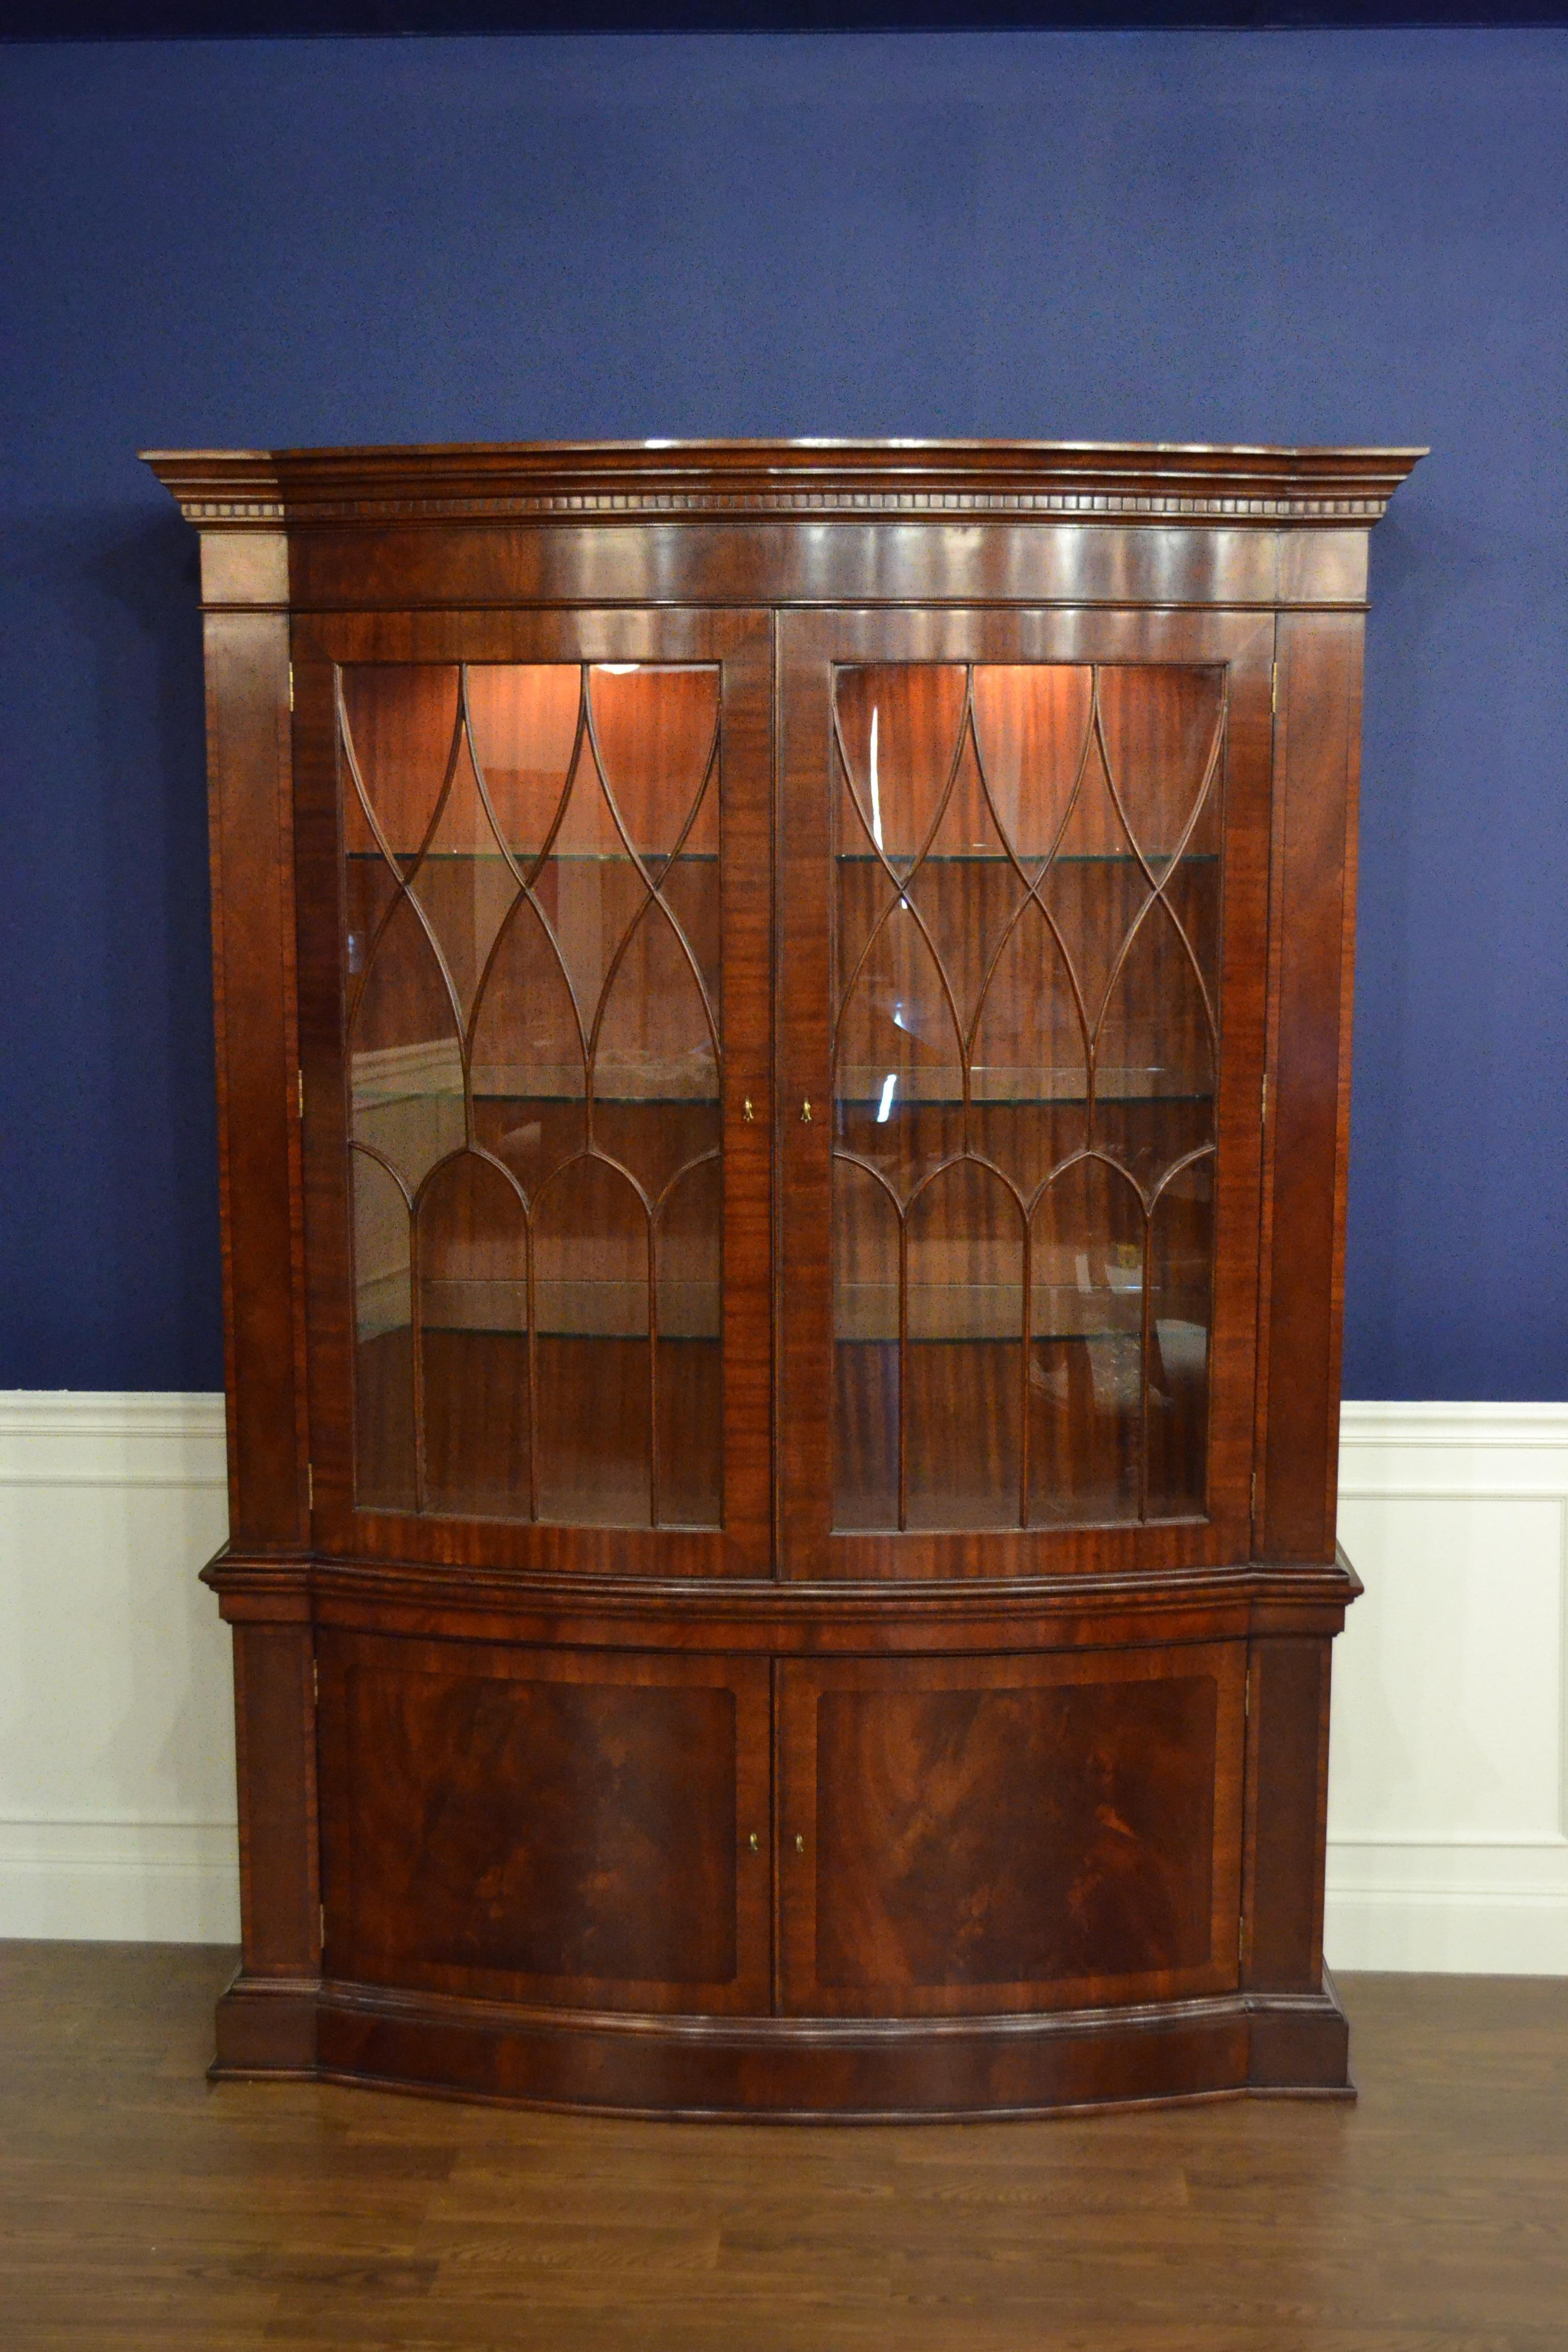 This a traditional mahogany bow front display or china cabinet with two doors by Leighton Hall. It features a delicately bowed front shape. The cabinet features two bottom doors with swirly crotch mahogany fields and straight grain mahogany borders.